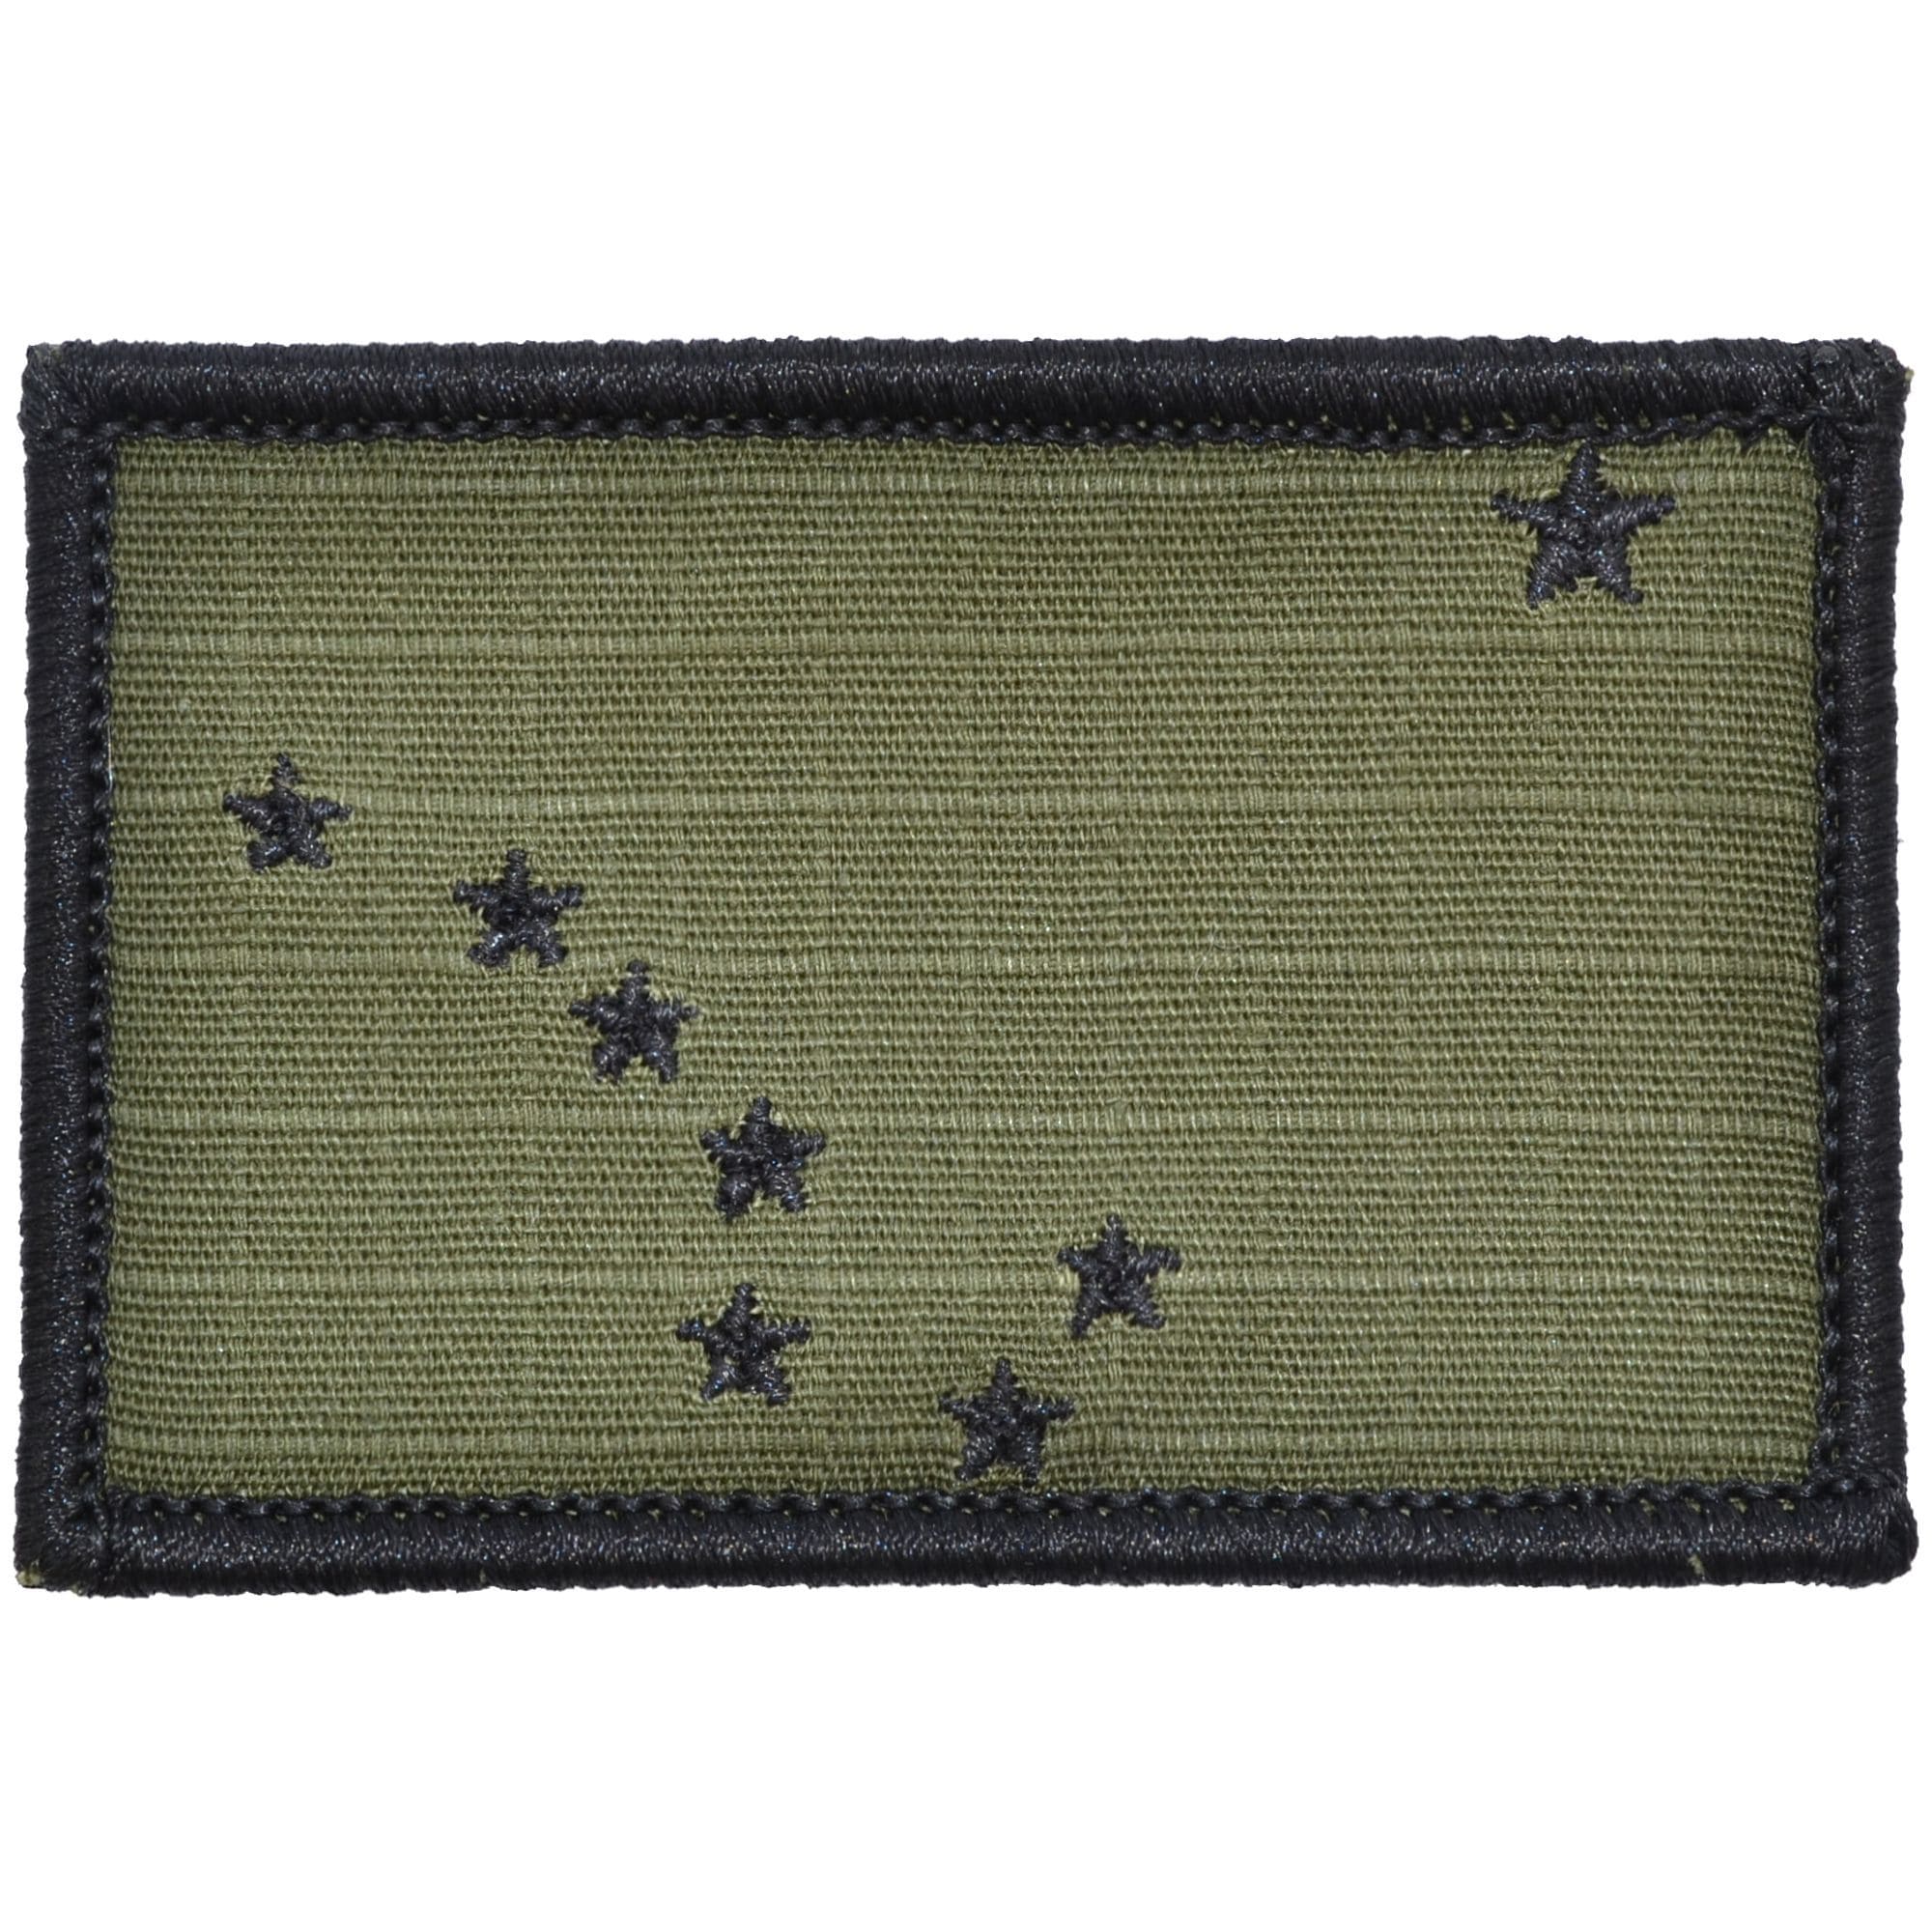 Tactical Gear Junkie Patches Olive Drab Alaska State Flag - 2x3 Patch